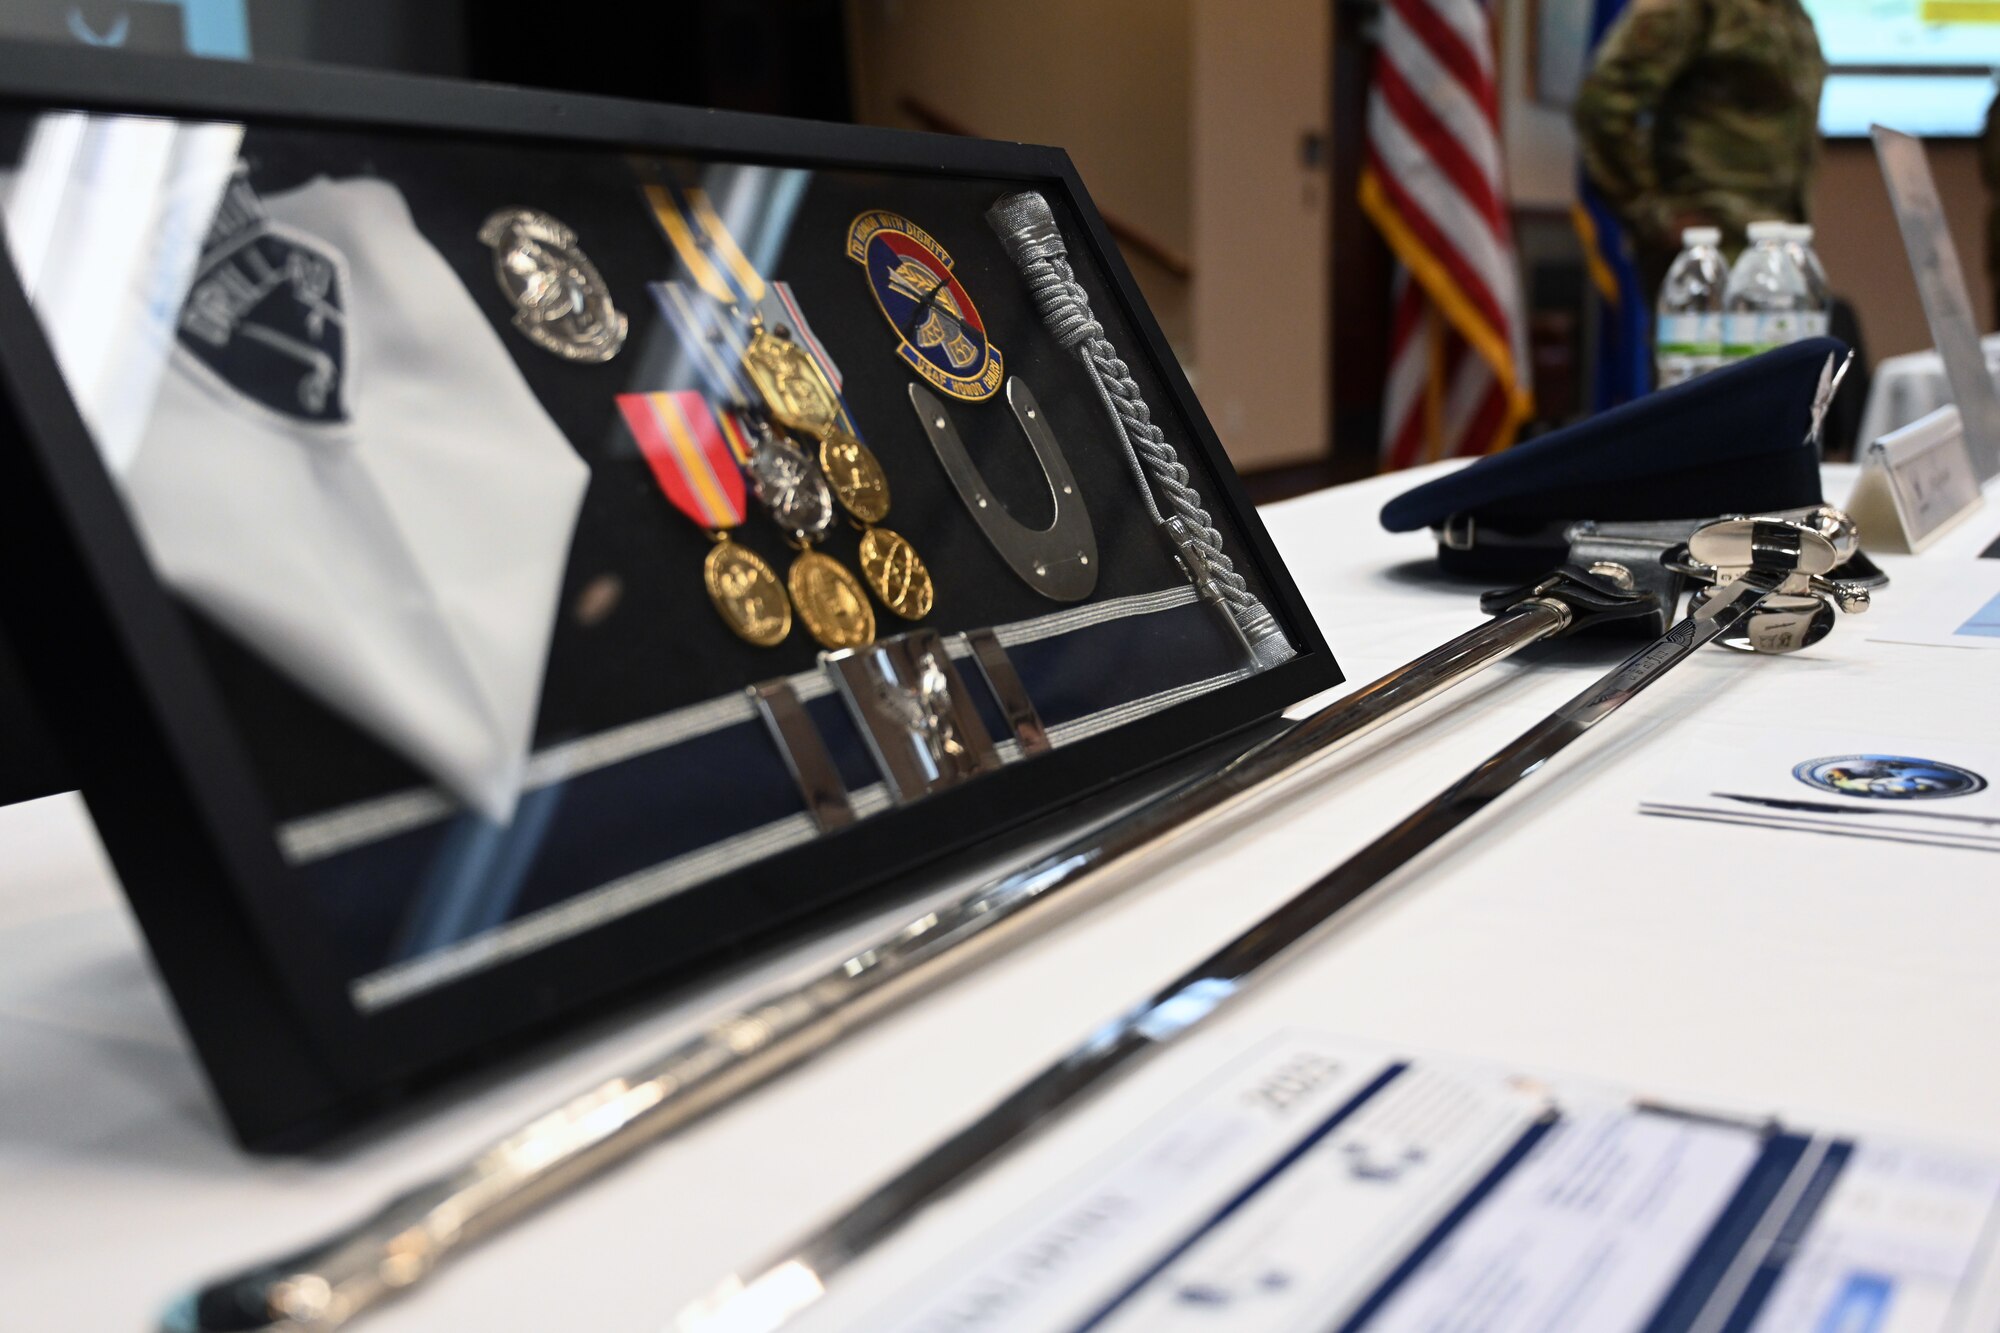 Artifacts used by honor guardsmen are displayed at a developmental special duties fair at Altus Air Force Base, Oklahoma, March 2, 2023. Recruiters, first sergeants, military training leaders, and more attended the event to serve as subject matter experts for Airmen considering alternate career paths. (U.S. Air Force photo by Master Sgt. Nathan Allen)